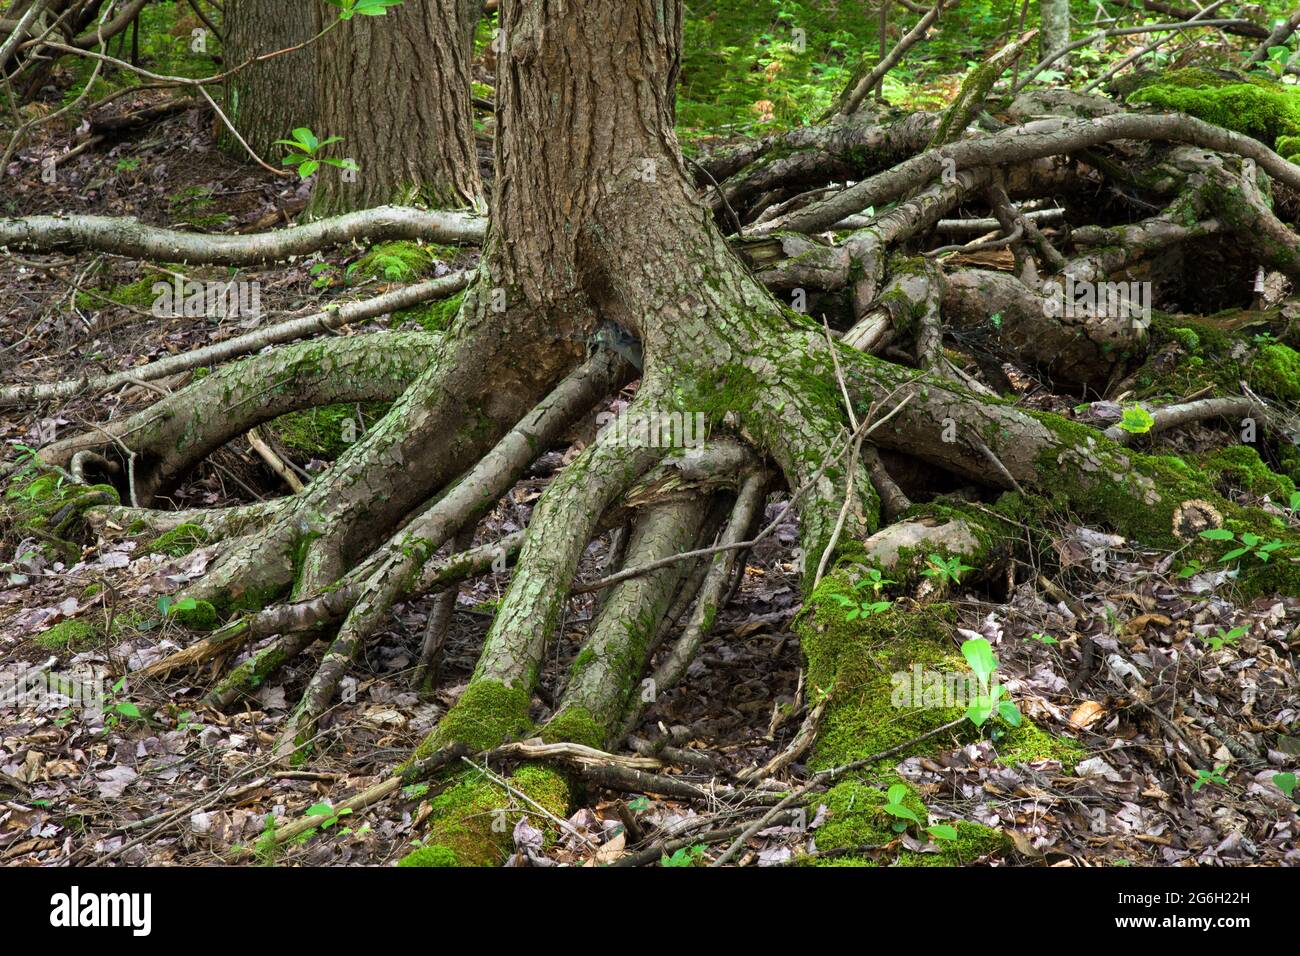 The stilted roots of an eastern hemlock tree.  The tree began growing on a fallen log. As the log rotted away it left the roots exposed. Stock Photo